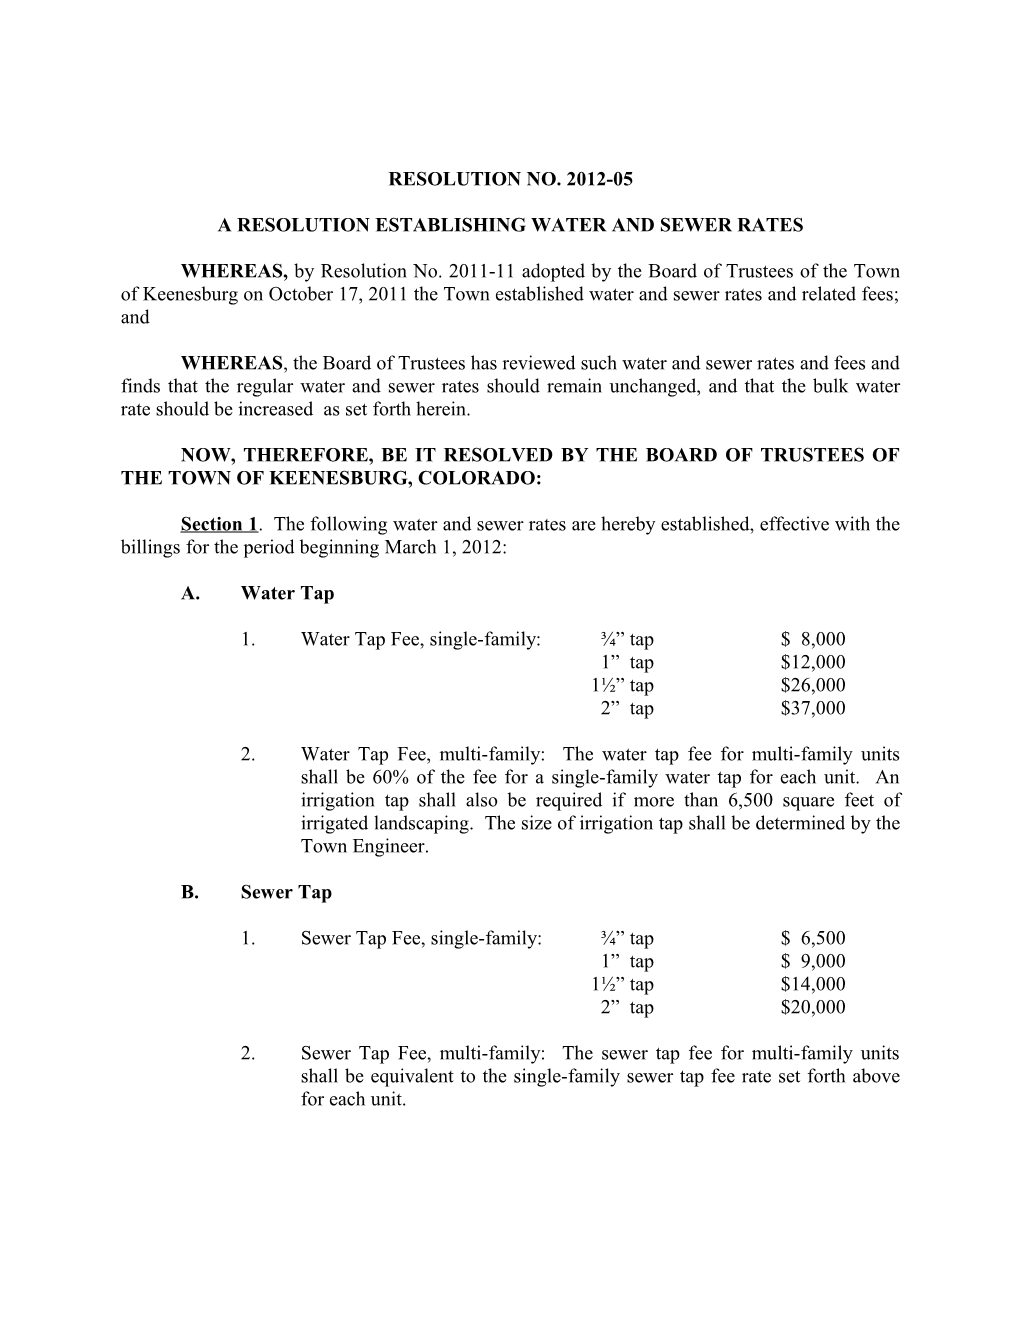 A Resolution Establishing Water and Sewer Rates